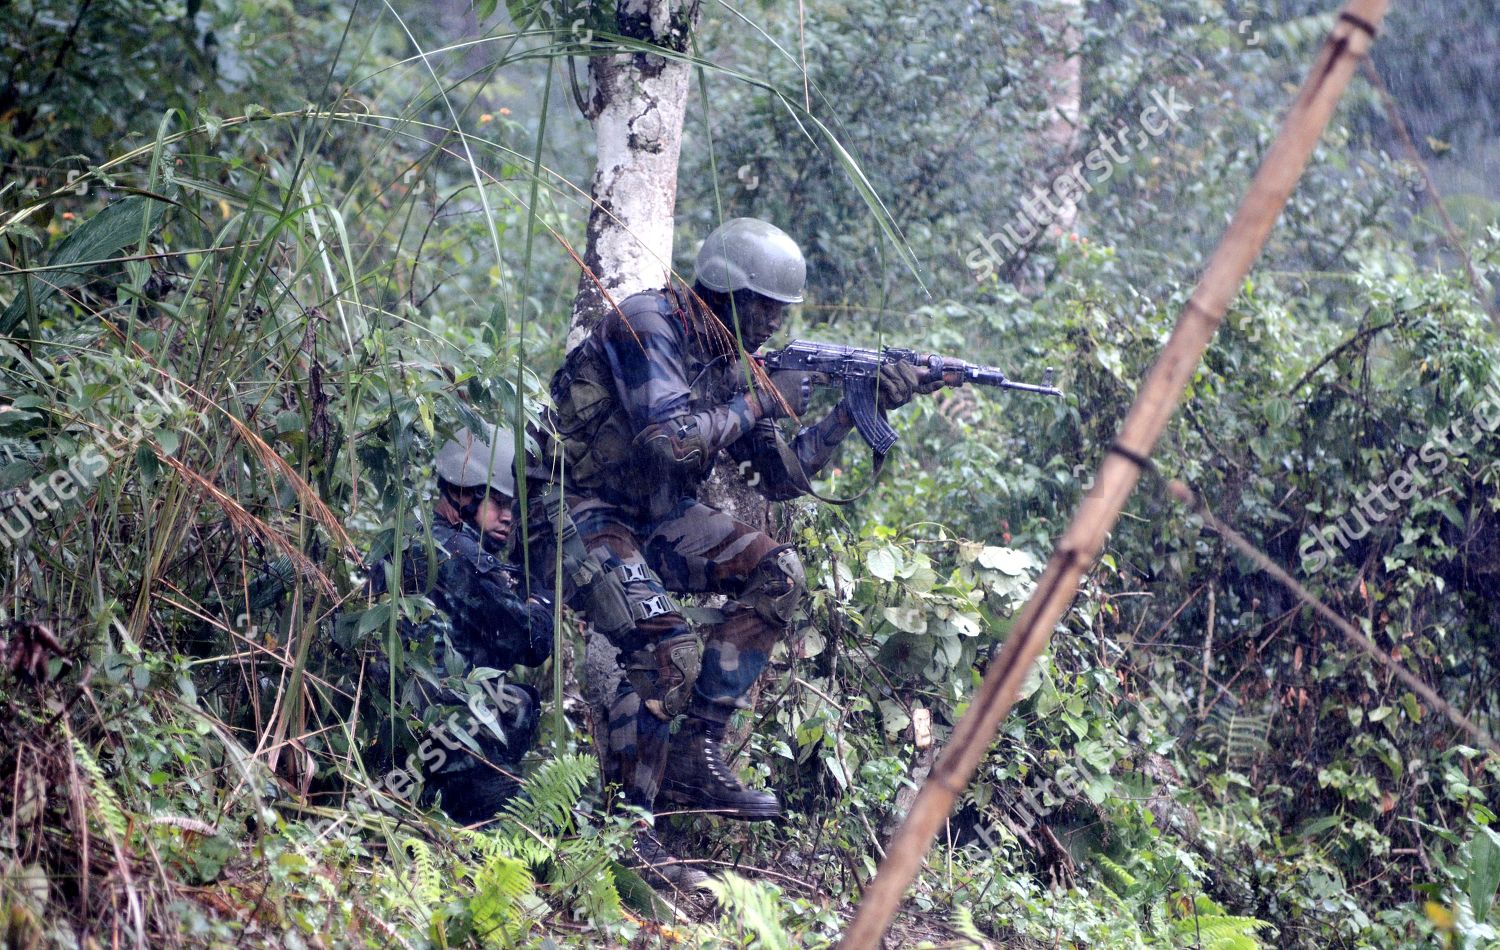 indo-thailand-joint-military-exercise-in-meghalaya-india-umroi-shutterstock-editorial-10421600l.jpg